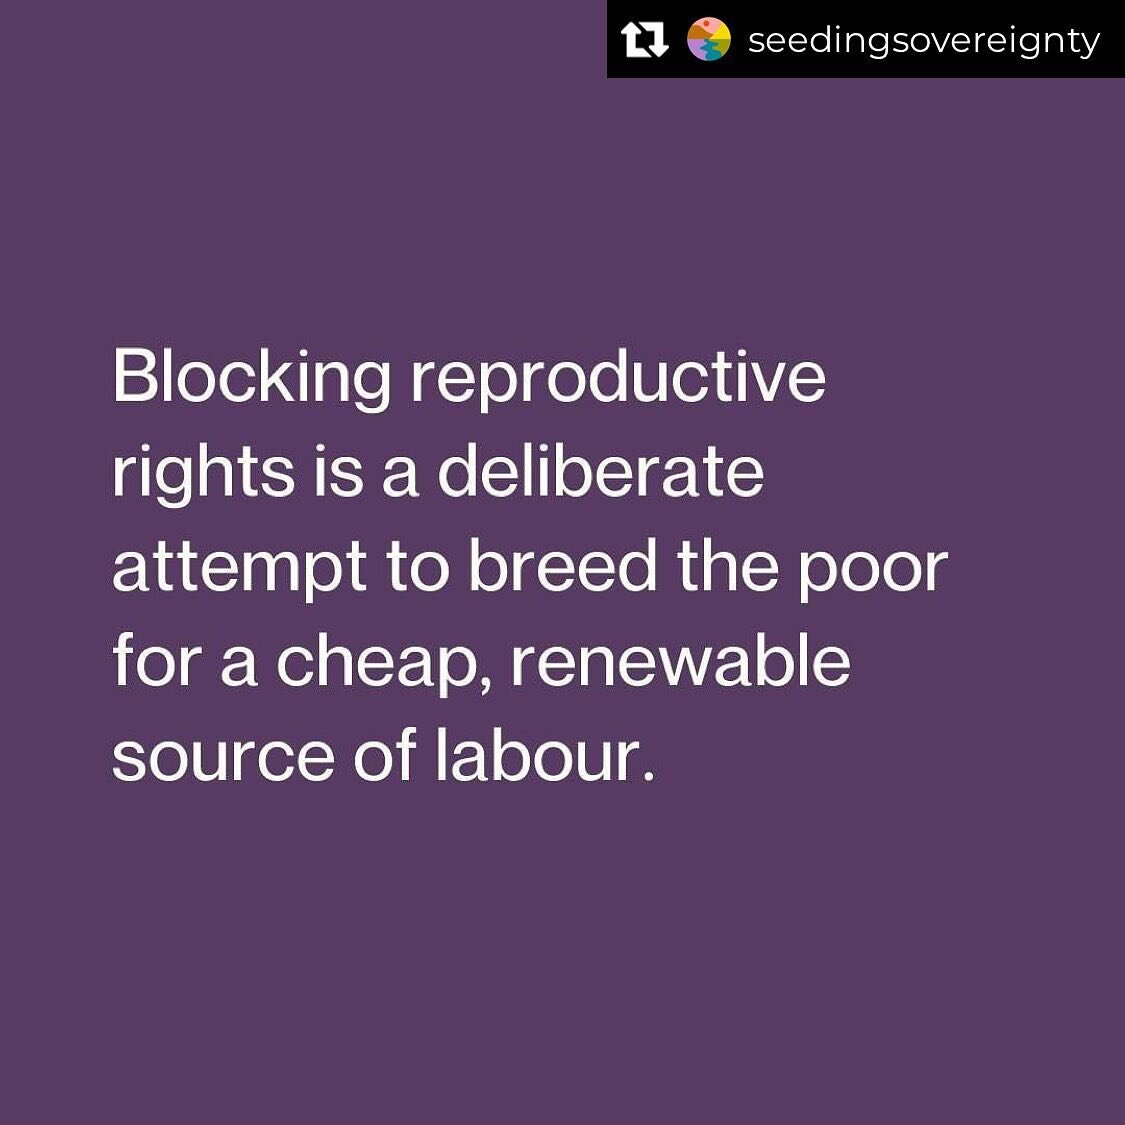 Repost from @seedingsovereignty
&bull;
Dropping this here. Thoughts? 

Repost @vandanashivamovie Let's be clear, abortions will still happen and the rich will still have access. It will be the poor that suffer and die from illegal abortions.

This ru